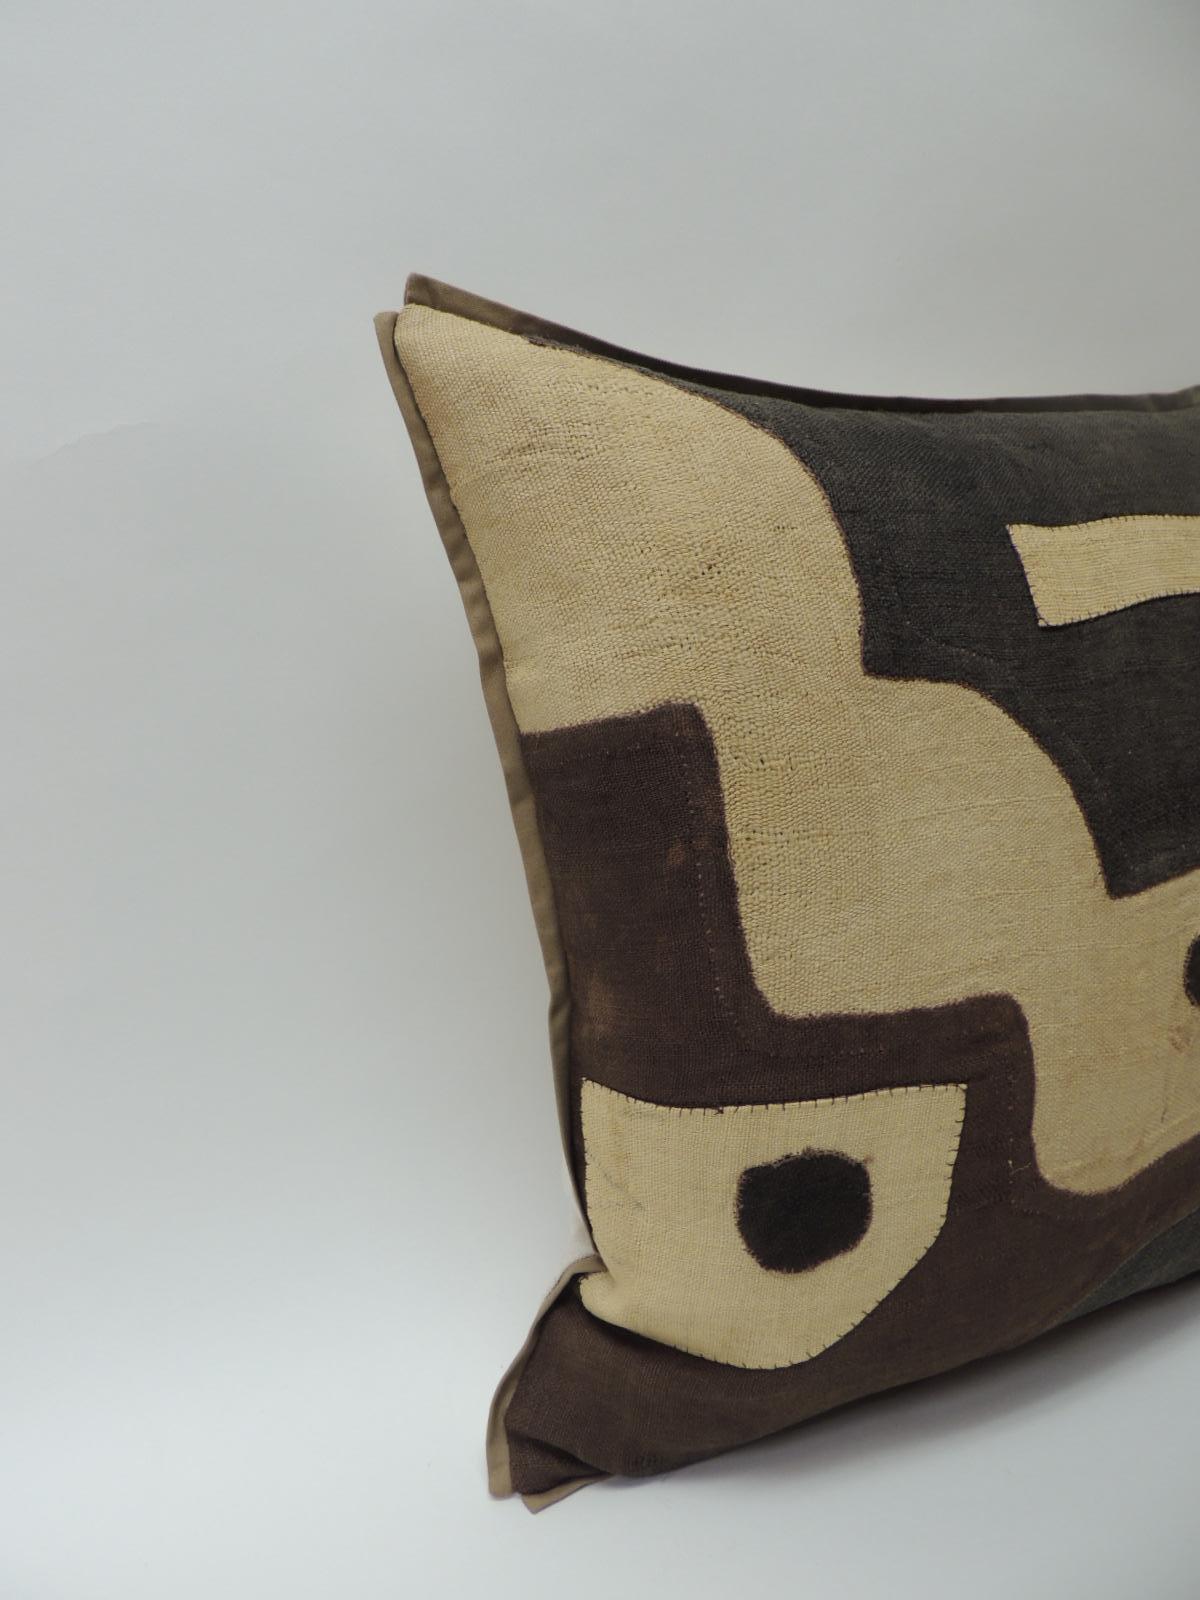 Applique raffia, patchwork and applique brown, black and natural decorative pillow
Custom flat cotton trim in earth-tone khaki color all around. Natural Cotton and linen backing. Pillow handcrafted and designed in the USA with custom made